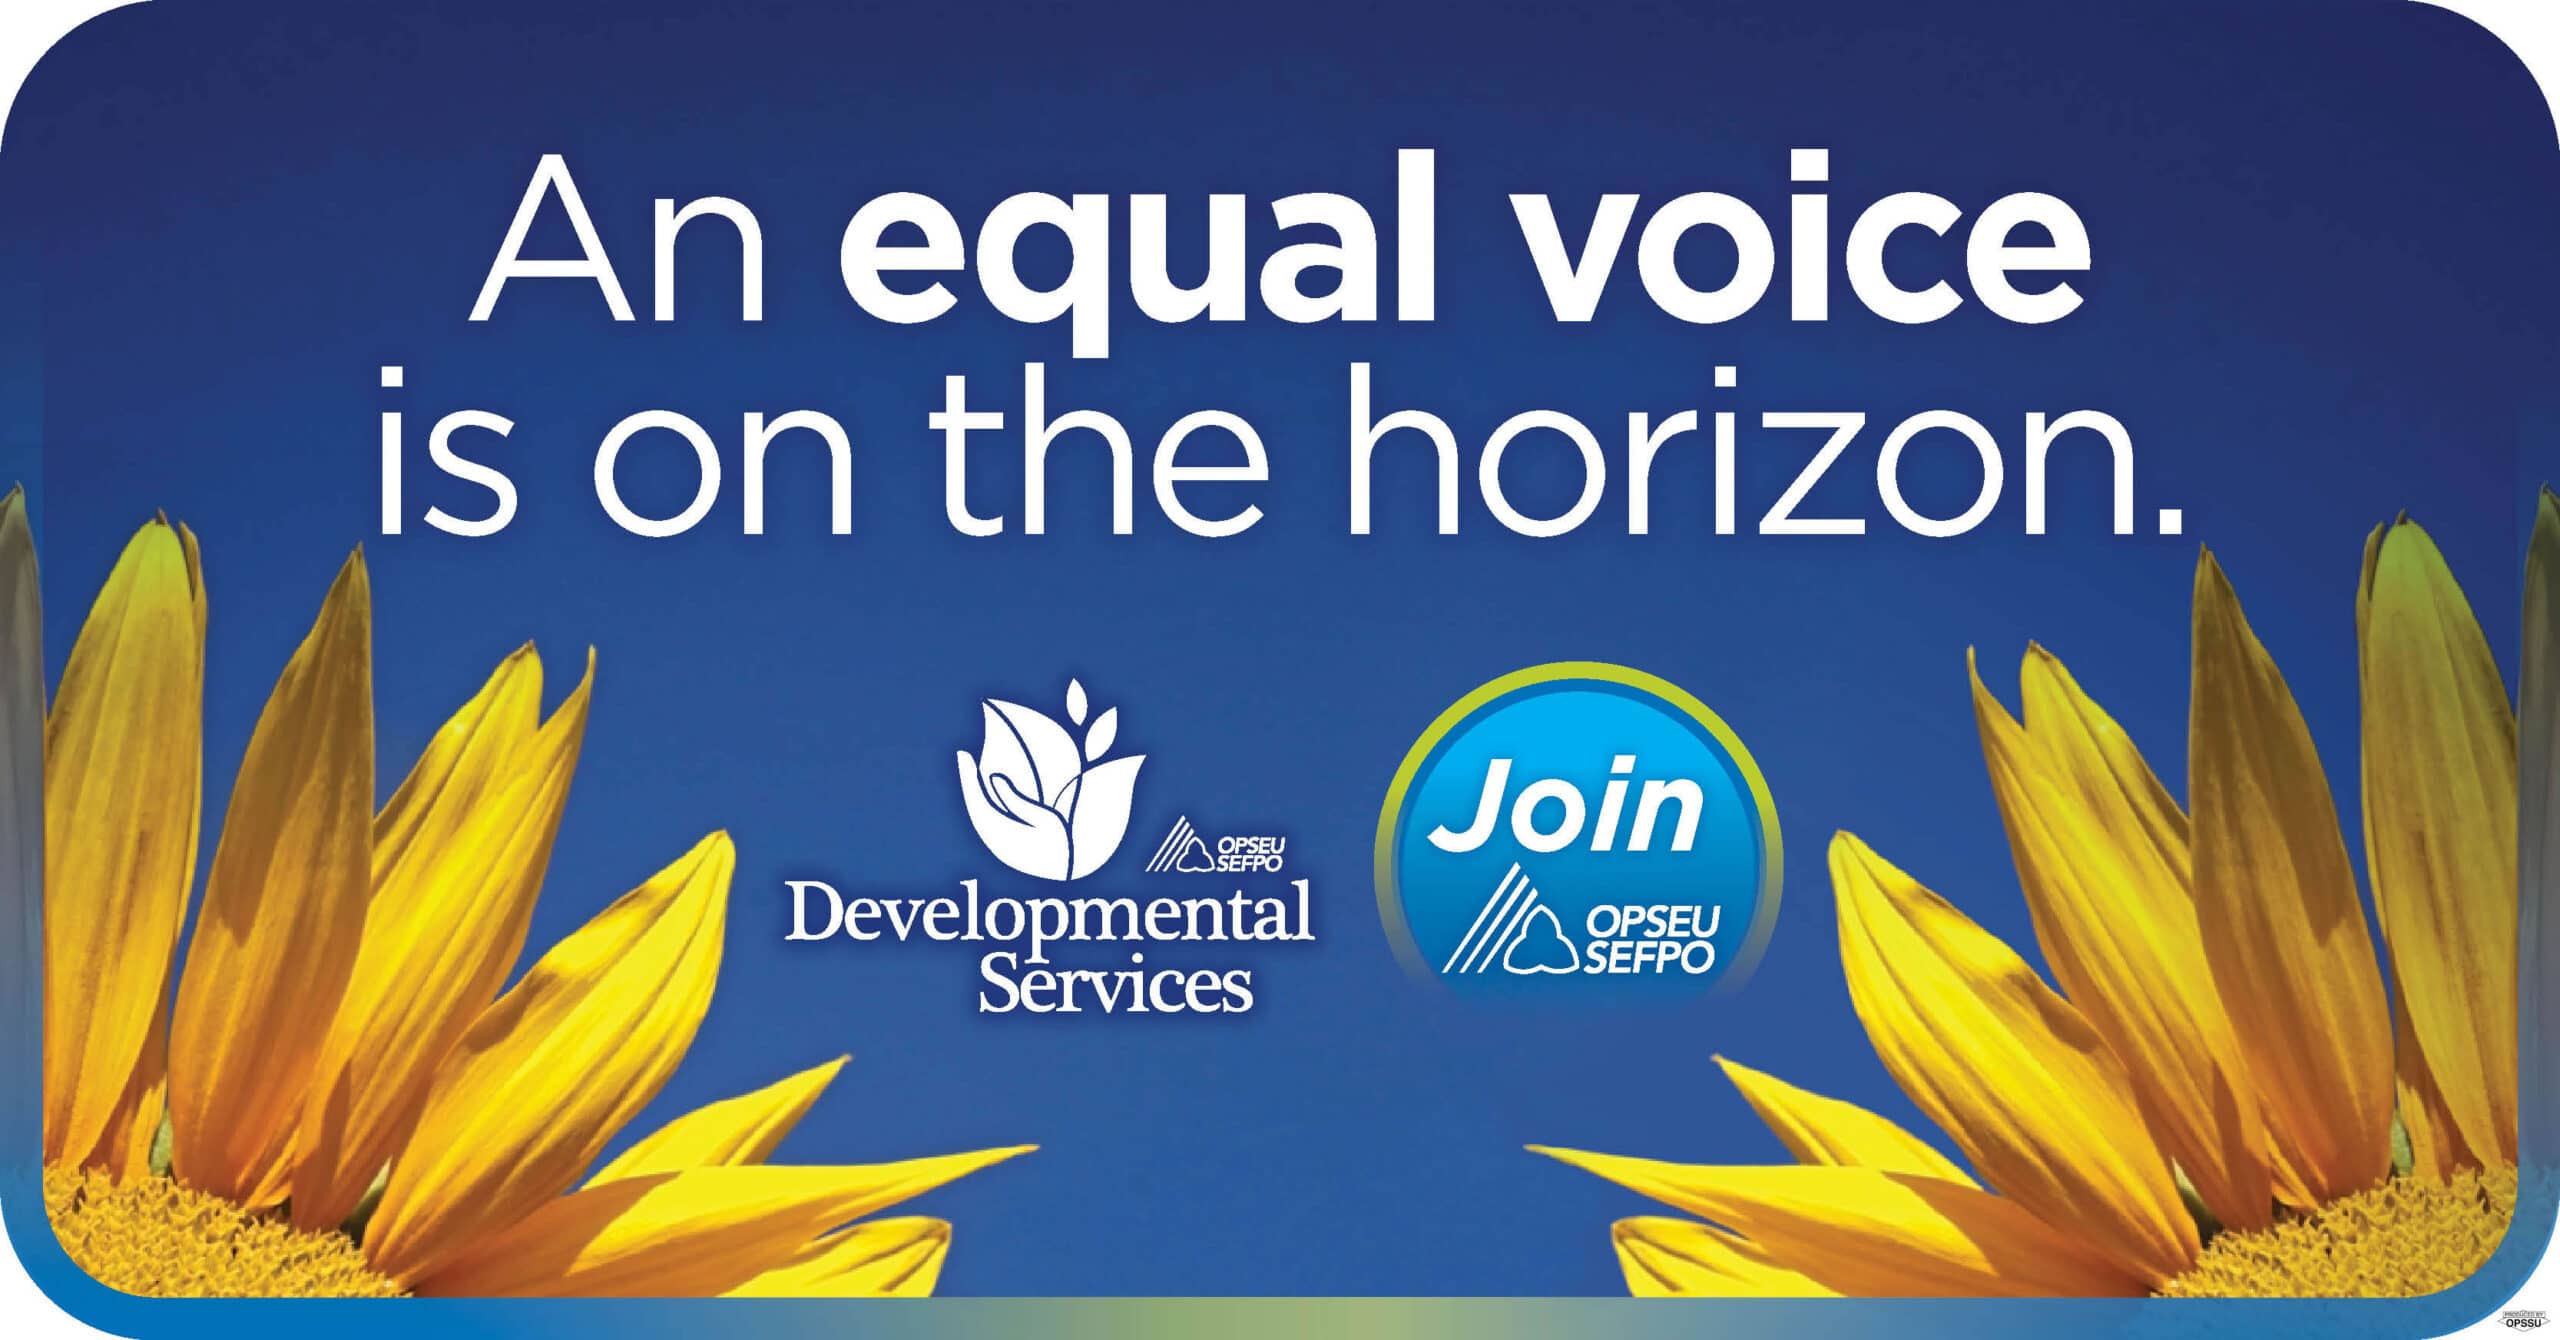 Developmental Services: An equal voice is on the horizon